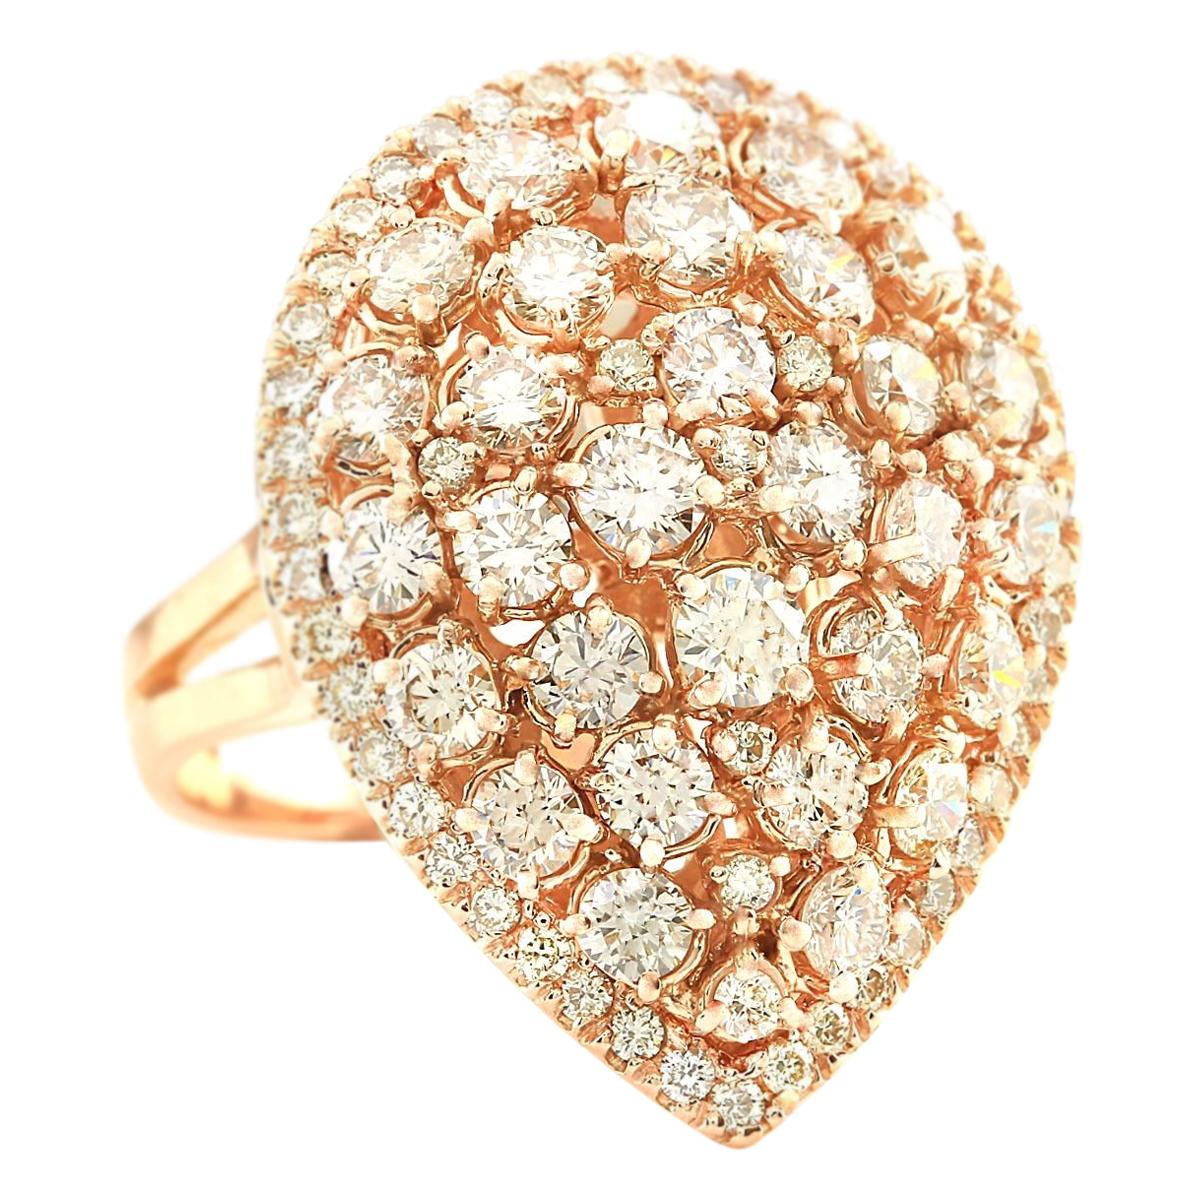 Stamped: 18K Rose Gold<br />Total Ring Weight: 10.6 Grams<br />Ring Length: N/A<br />Ring Width: N/A<br />Diamond Weight: Total  Diamond Weight is 3.70 Carat<br />Color: F-G, Clarity: VS2-SI1<br />Face Measures: 27.10x20.48 mm<br />Sku: [703808W]
